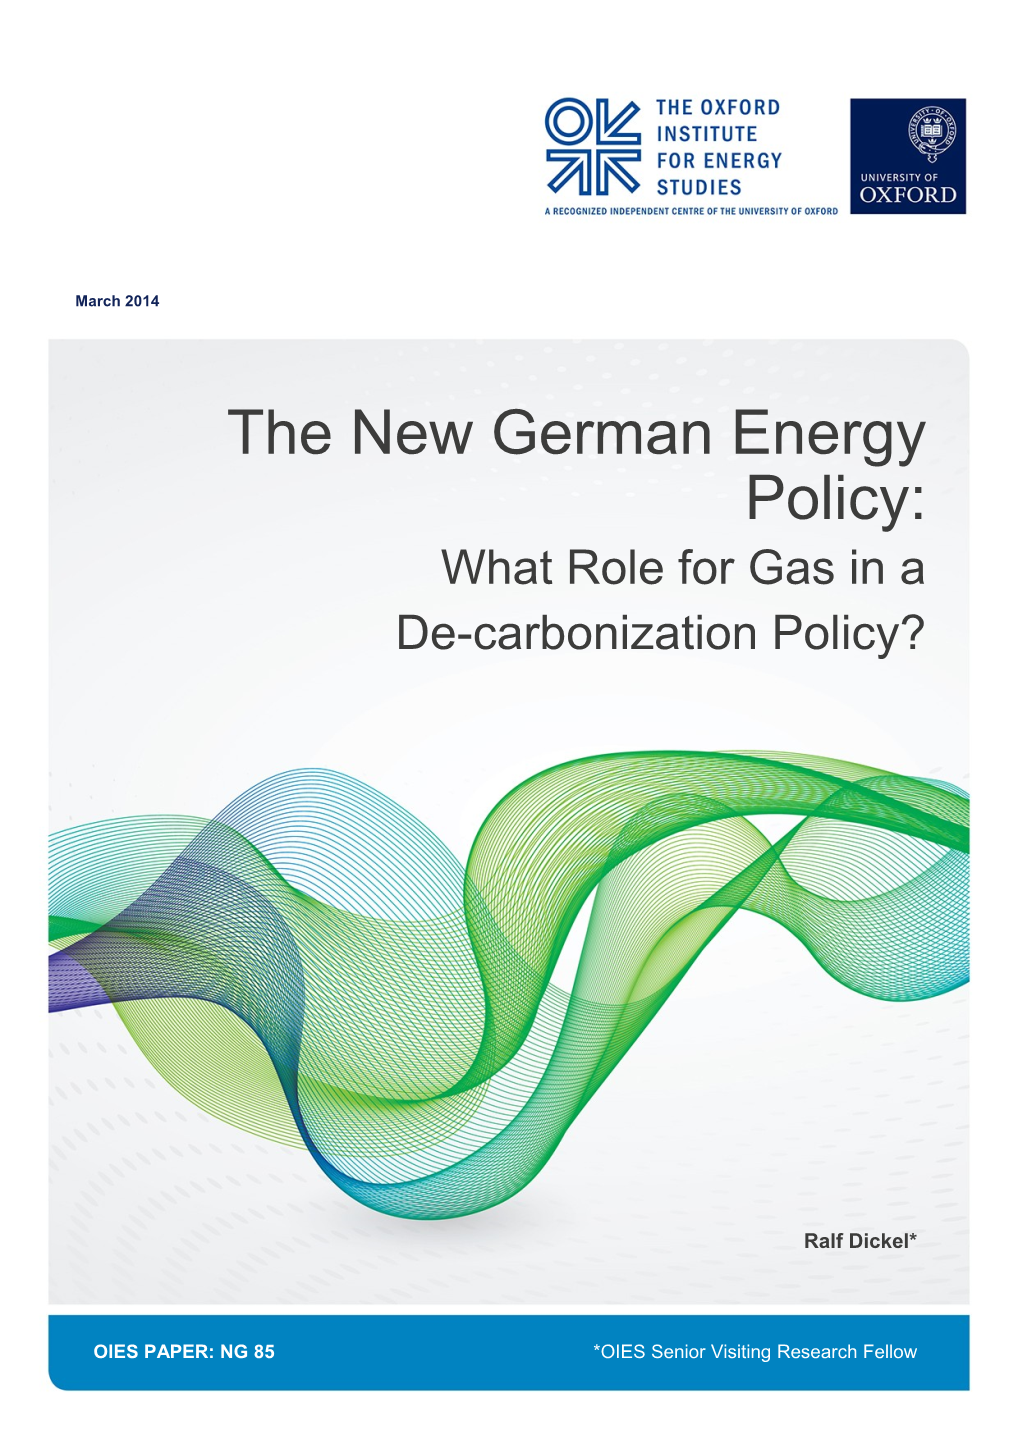 The New German Energy Policy – What Role for Gas in a De- Carbonization Policy?